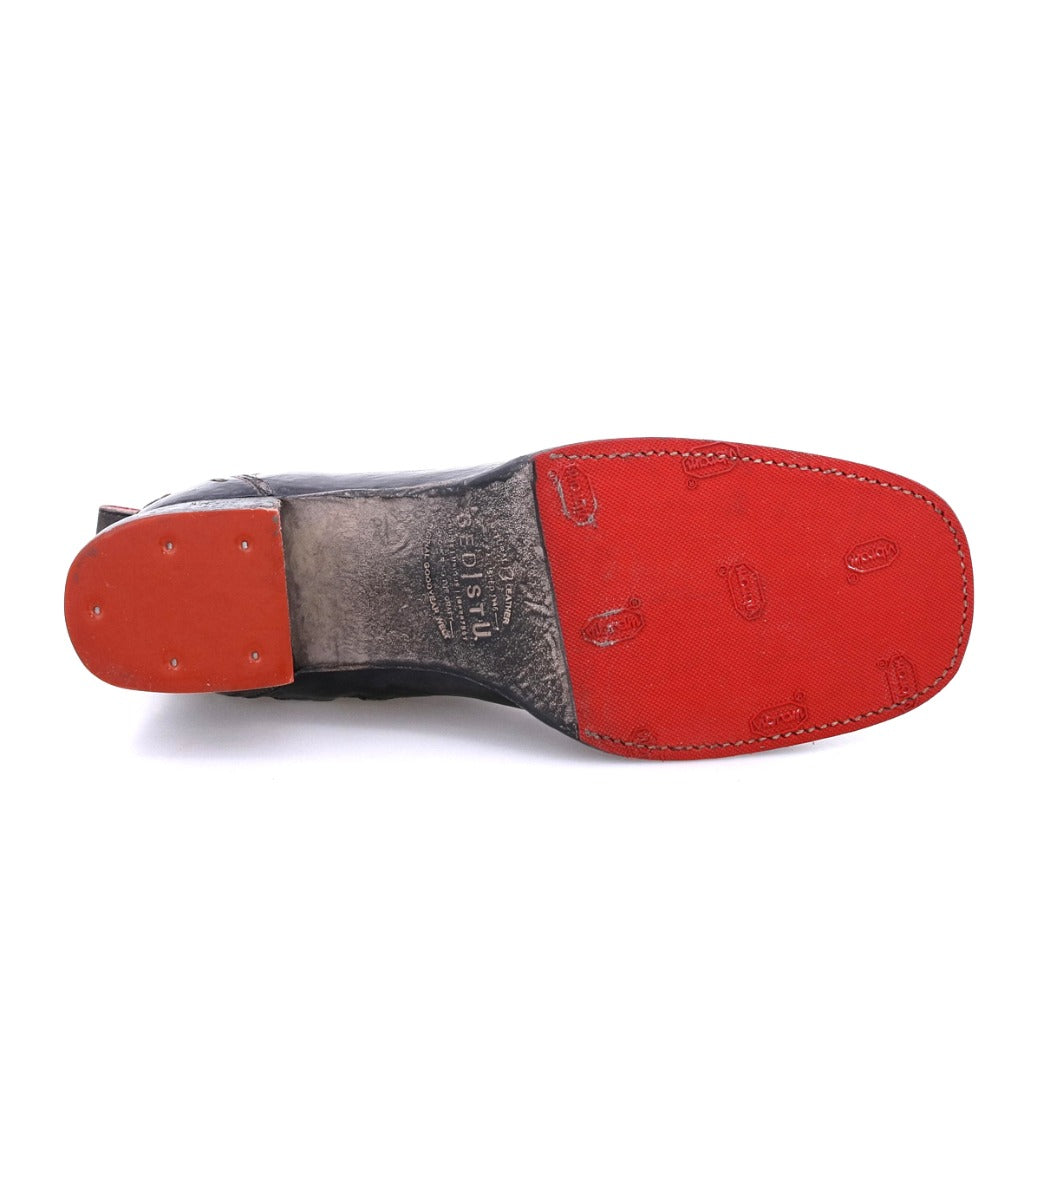 A black and red Merryli shoe with a red sole from Bed Stu.